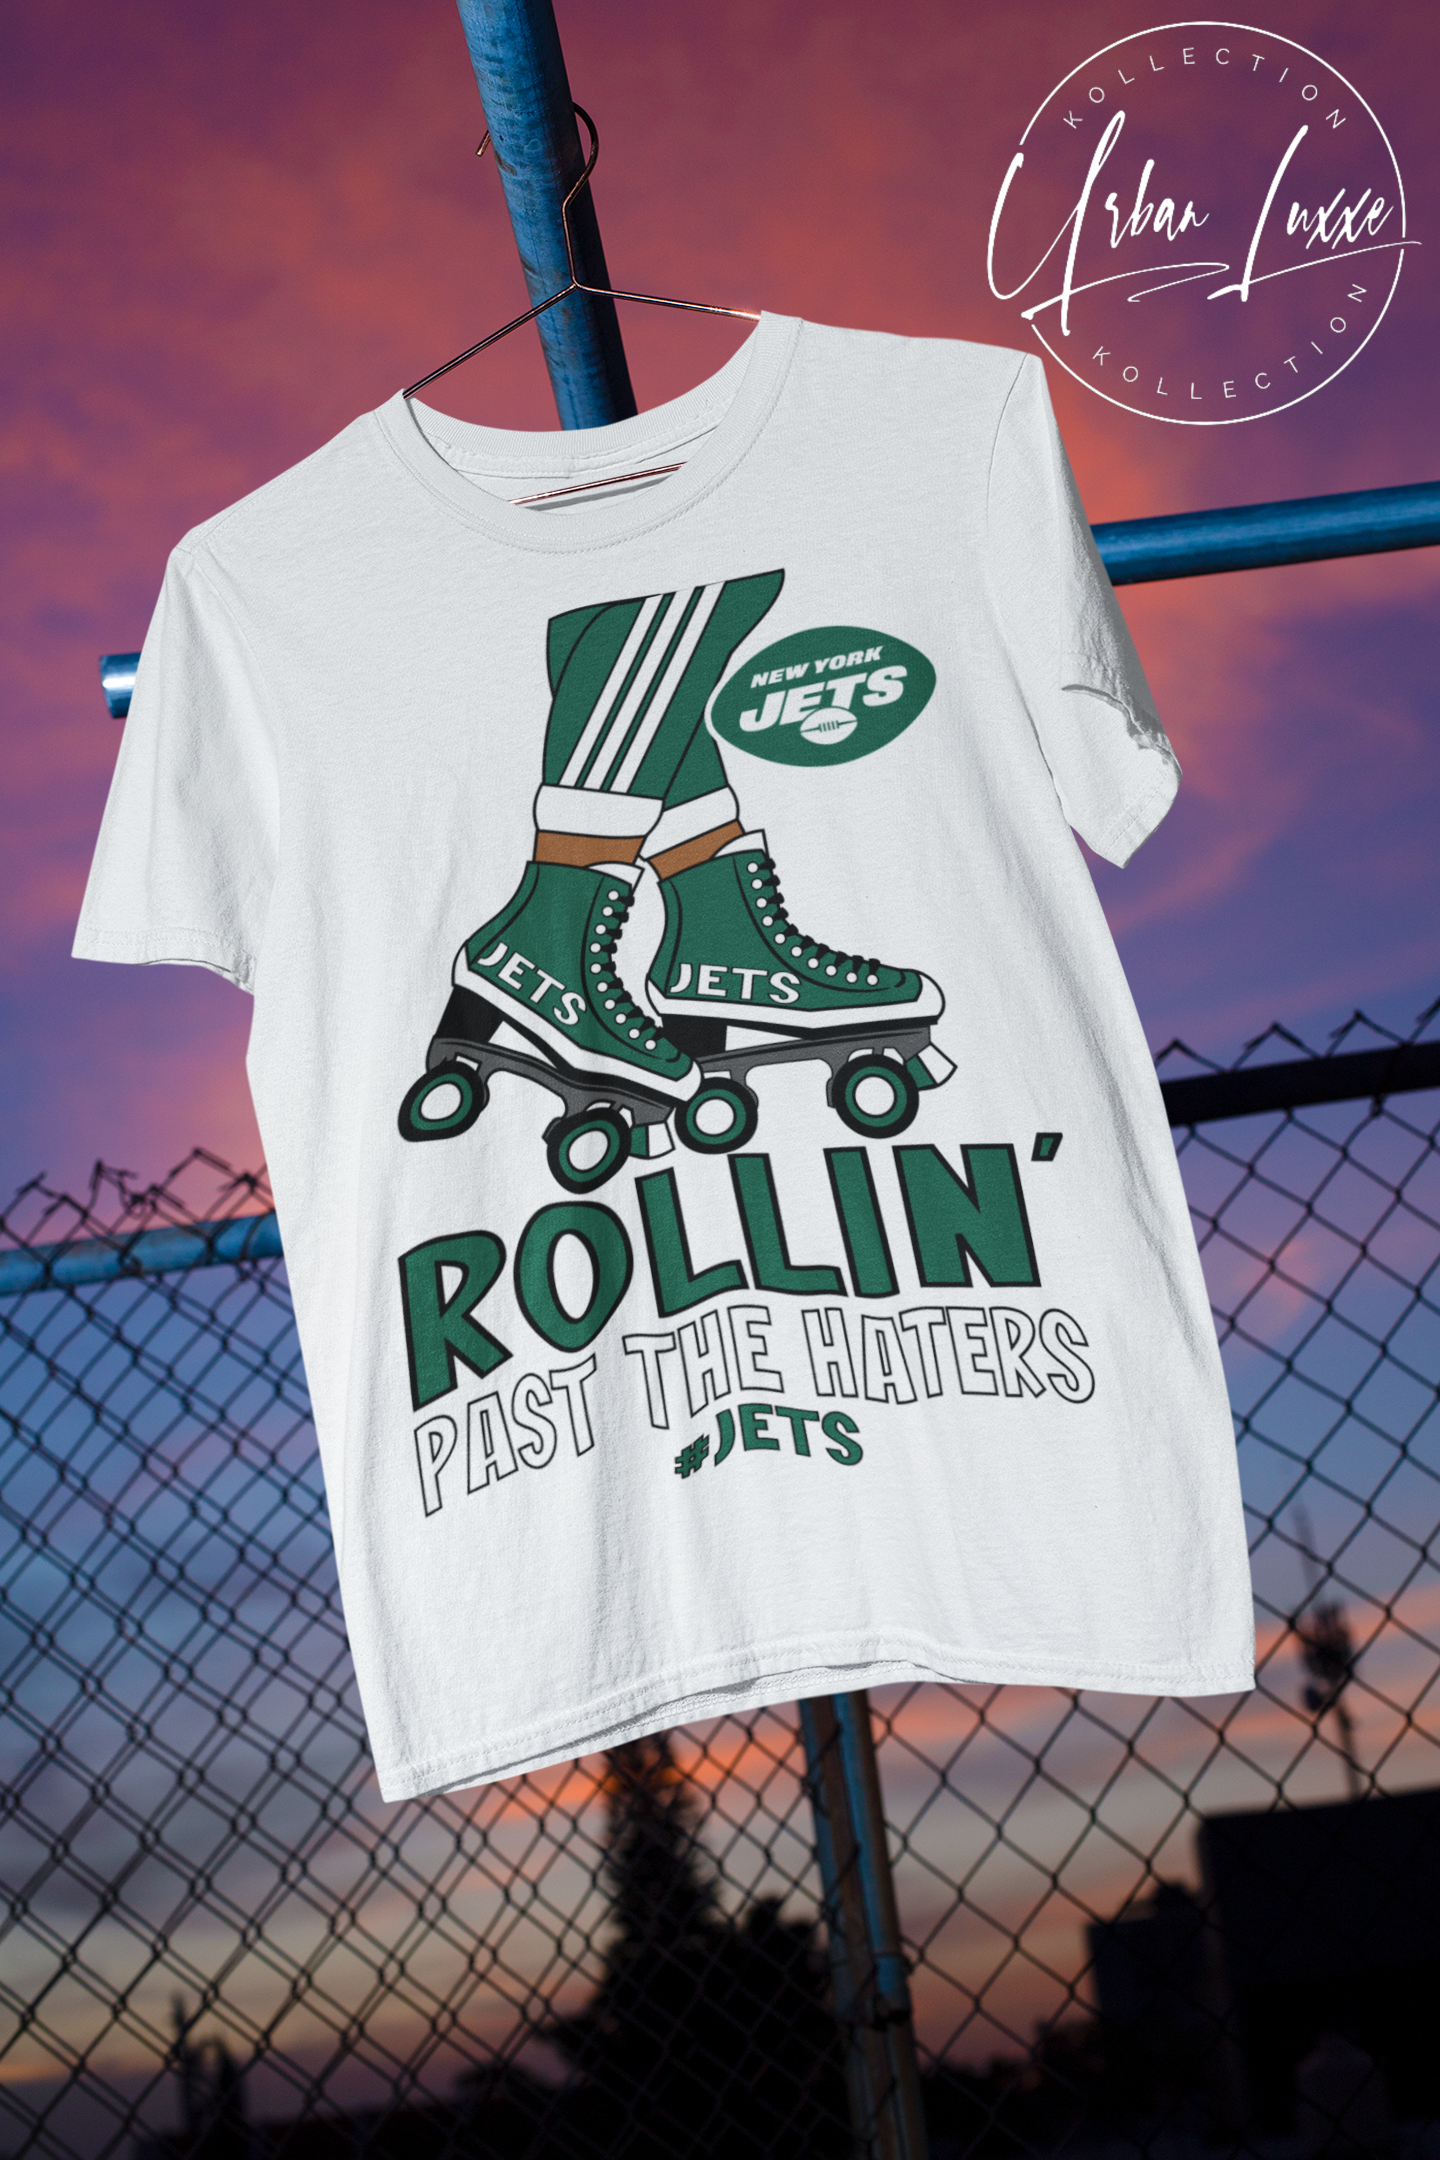 Rollin’ Past The Haters NY Jets T-shirt